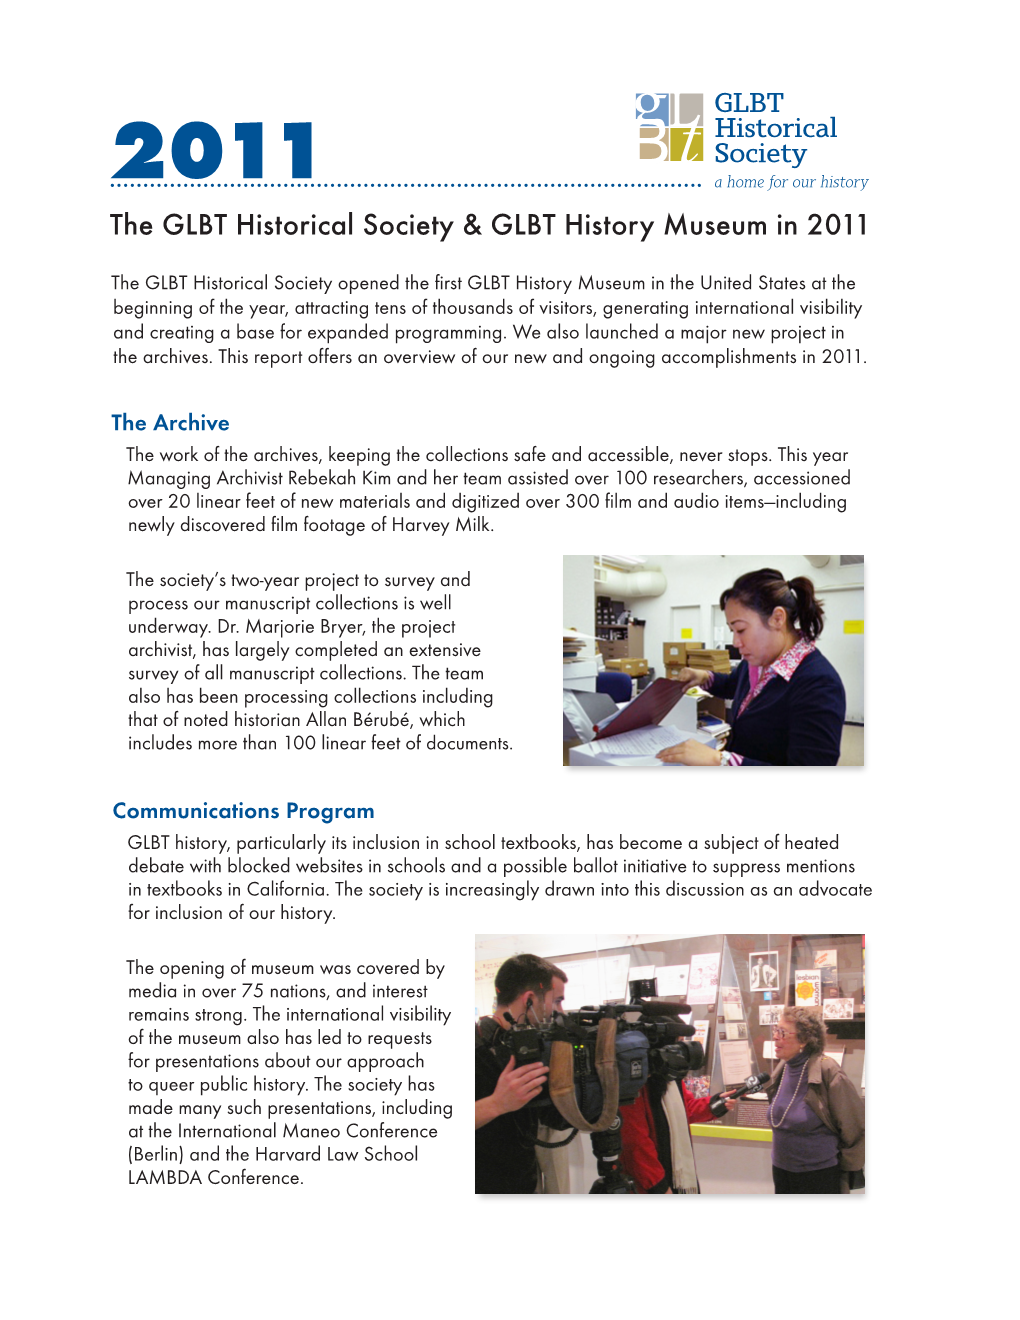 The GLBT Historical Society & GLBT History Museum in 2011